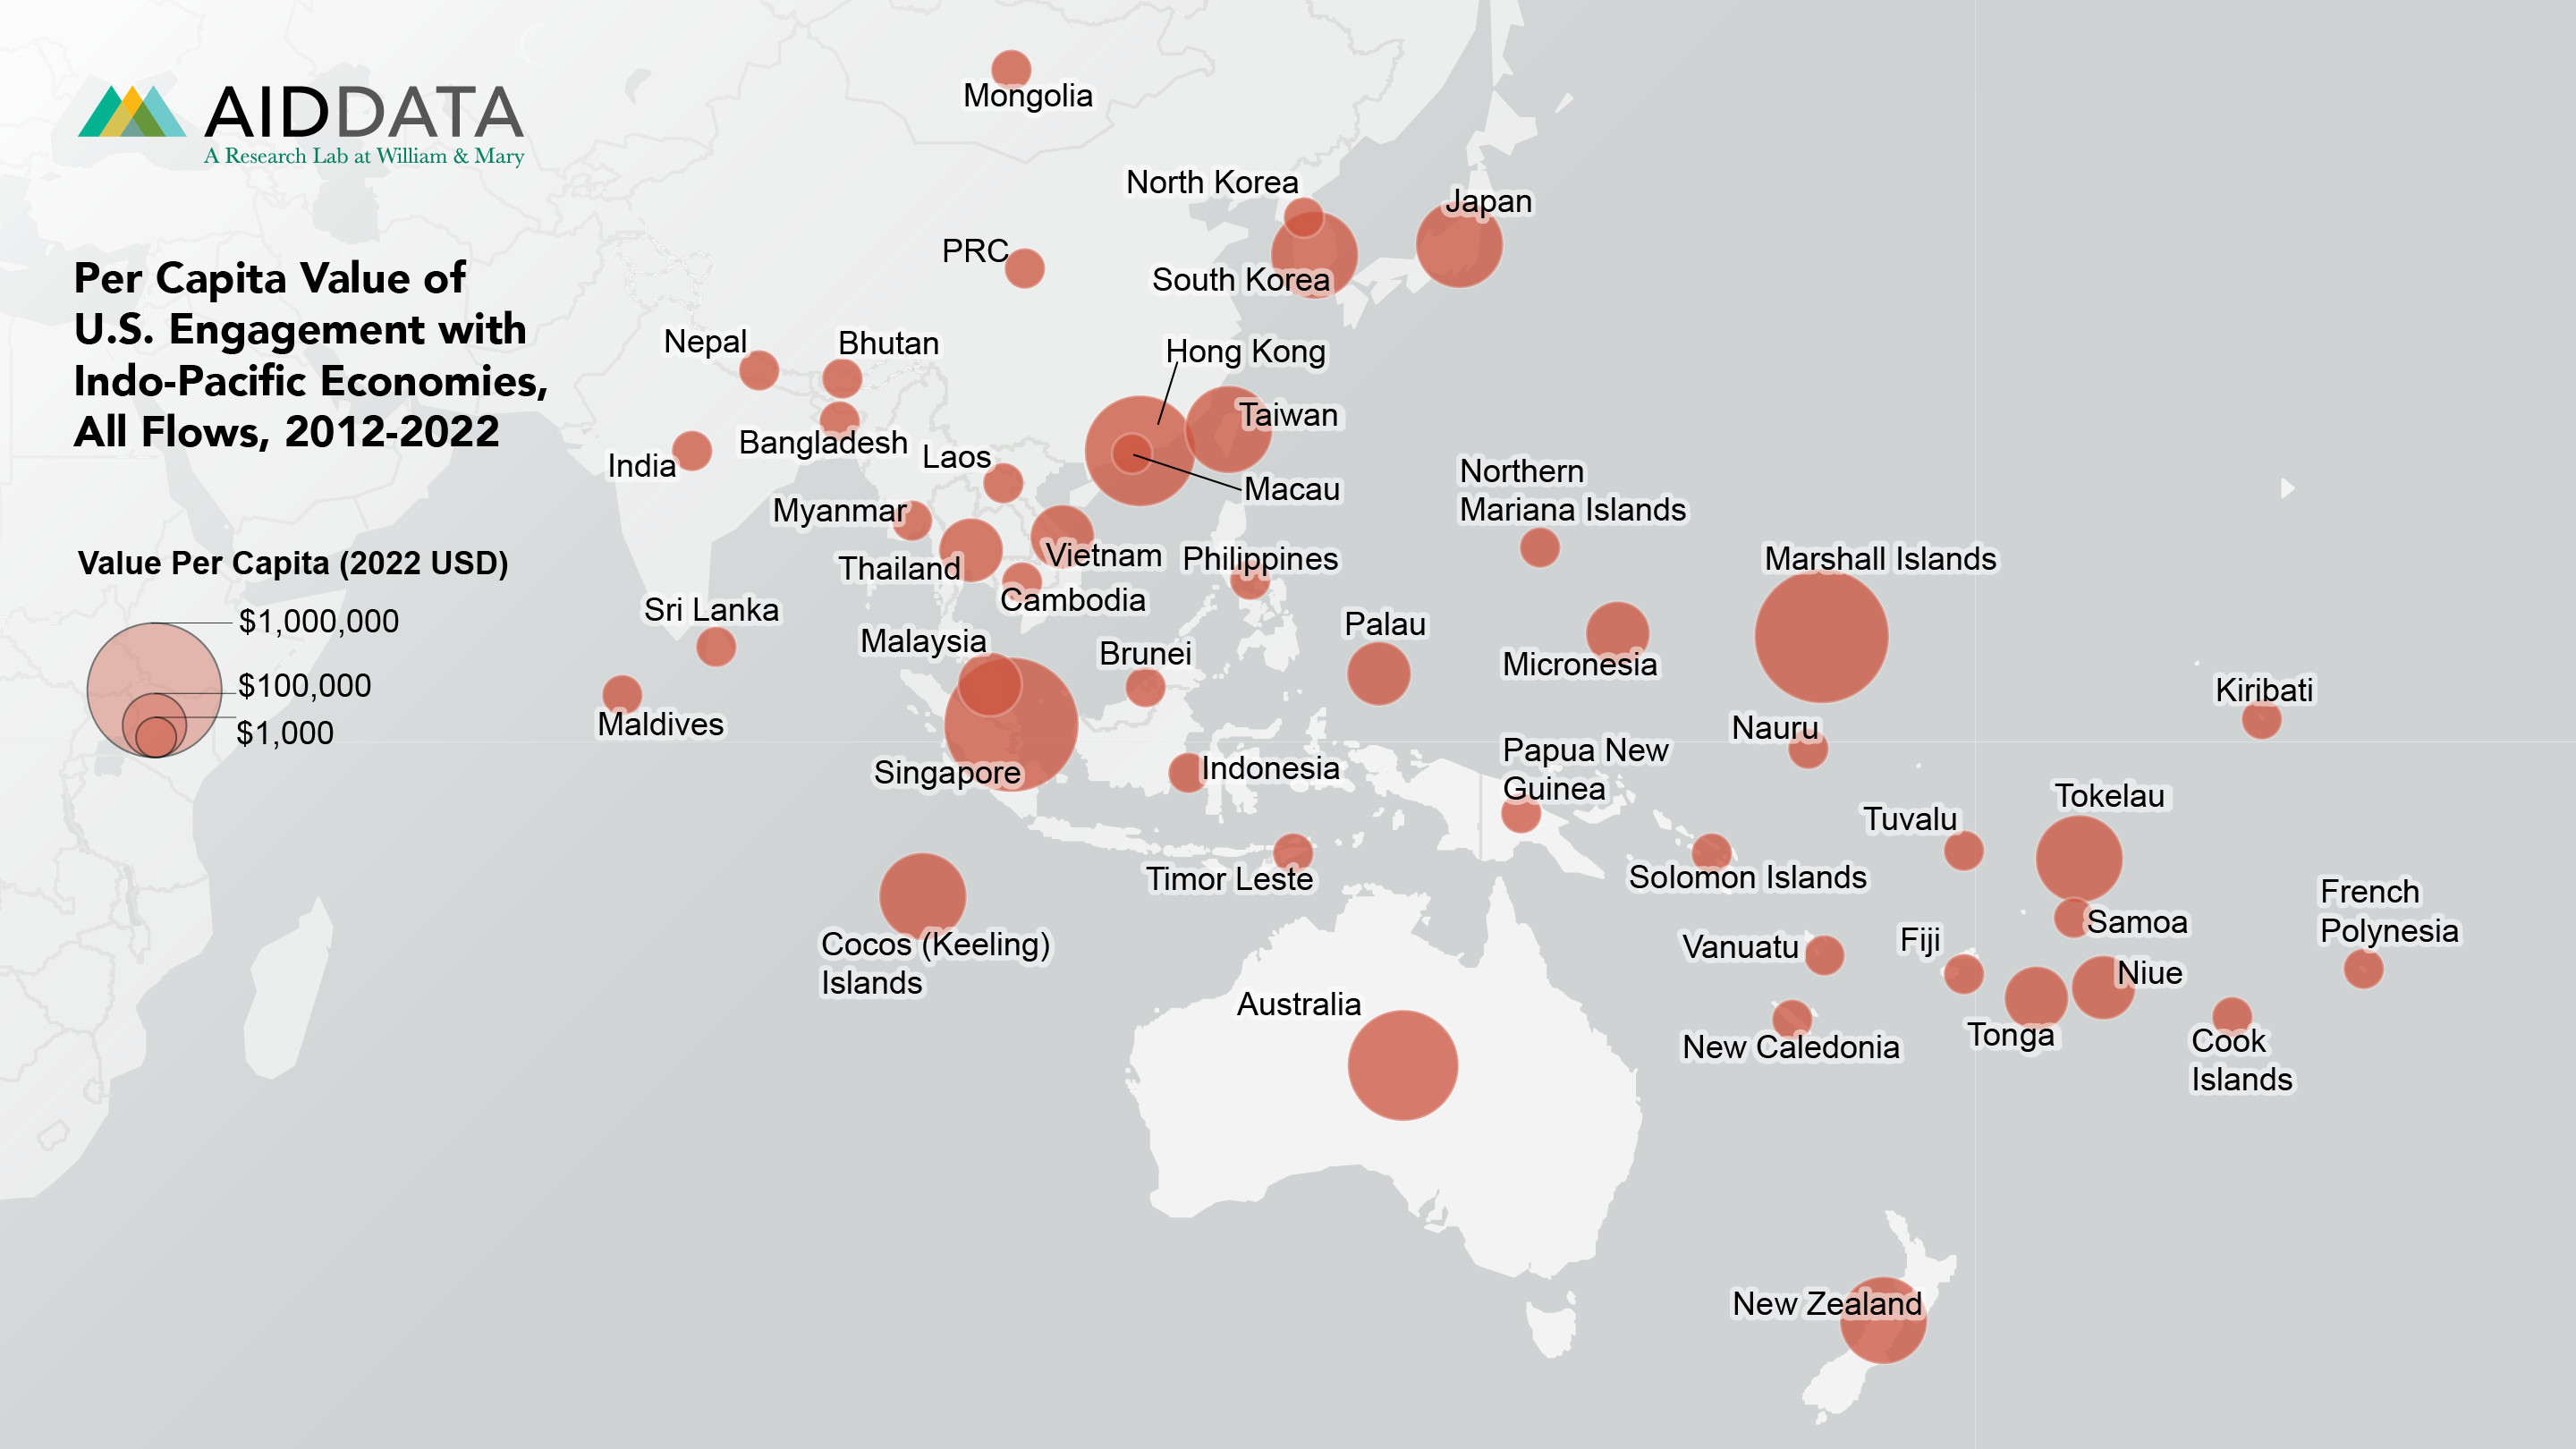 Map of Per Capita Value of U.S. Engagement with Indo-Pacific Economies, All Flows, 2012-2022